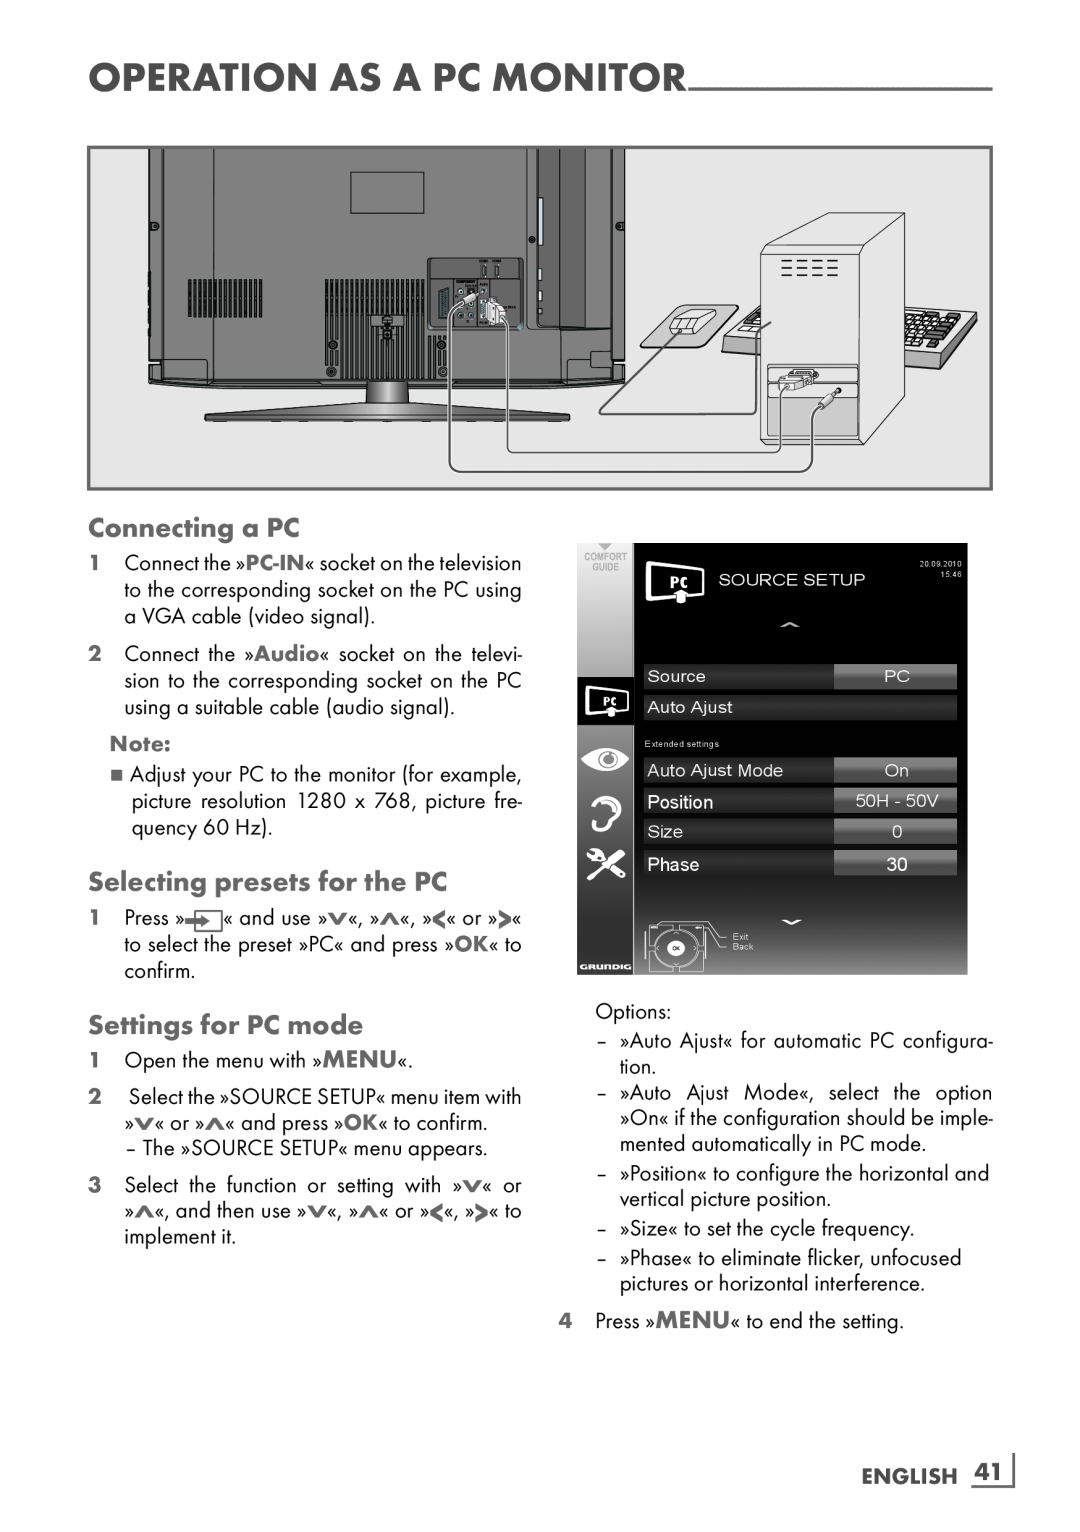 Grundig 32 VLD 4201 BF manual Connecting a PC, Selecting presets for the PC, Settings for PC mode, ENGLISH ­41 